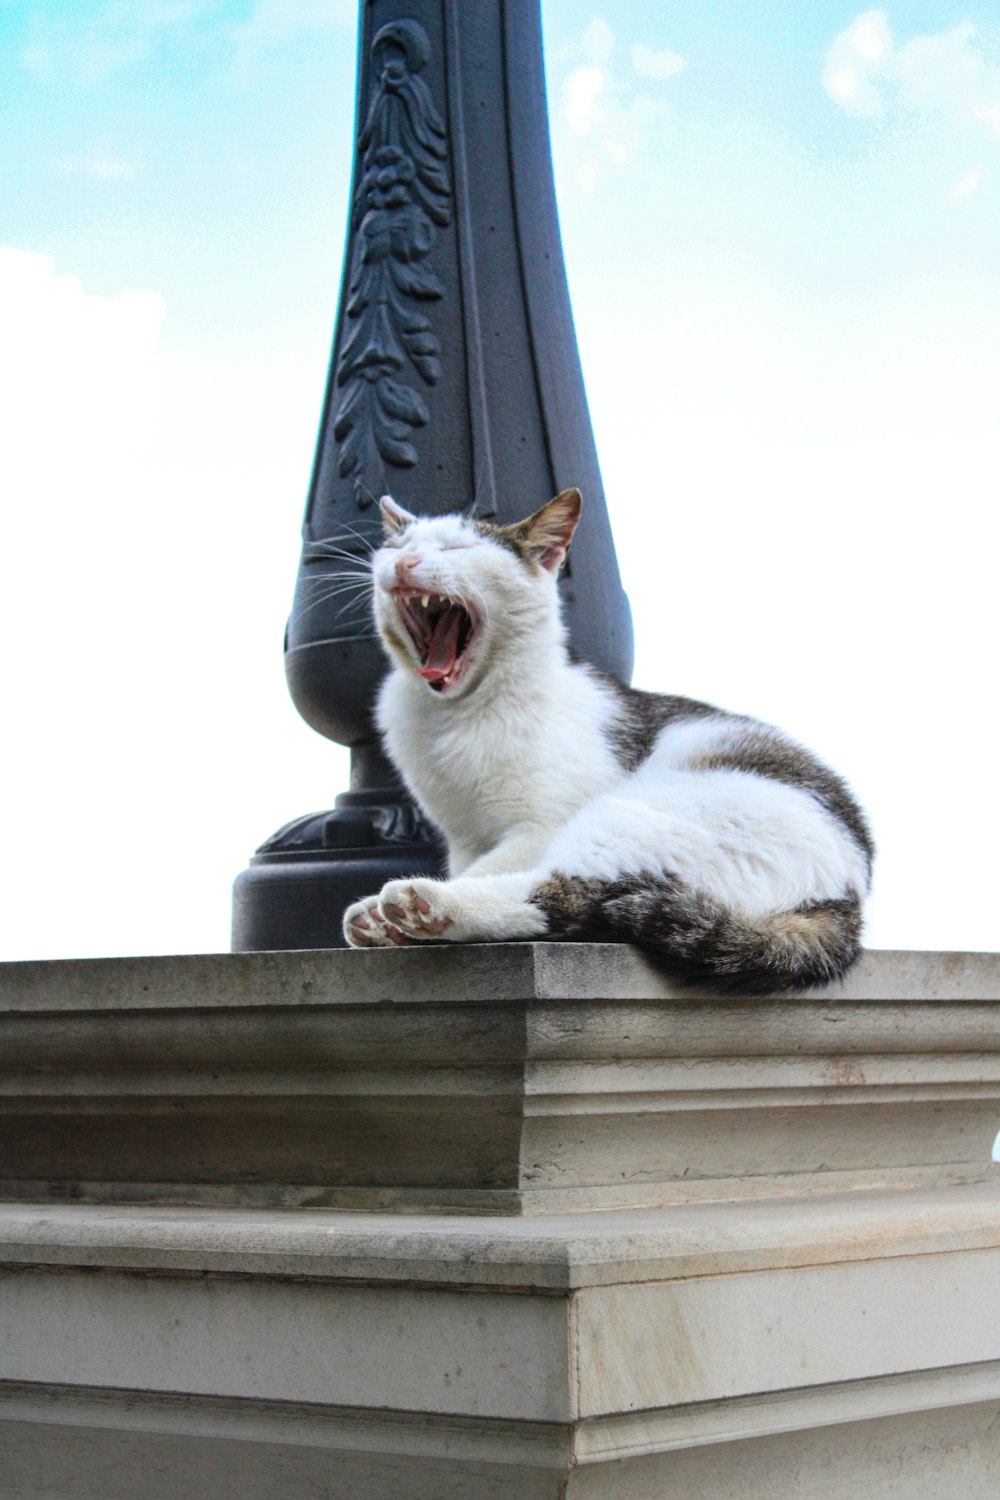 a cat yawns while sitting on top of a lamp post